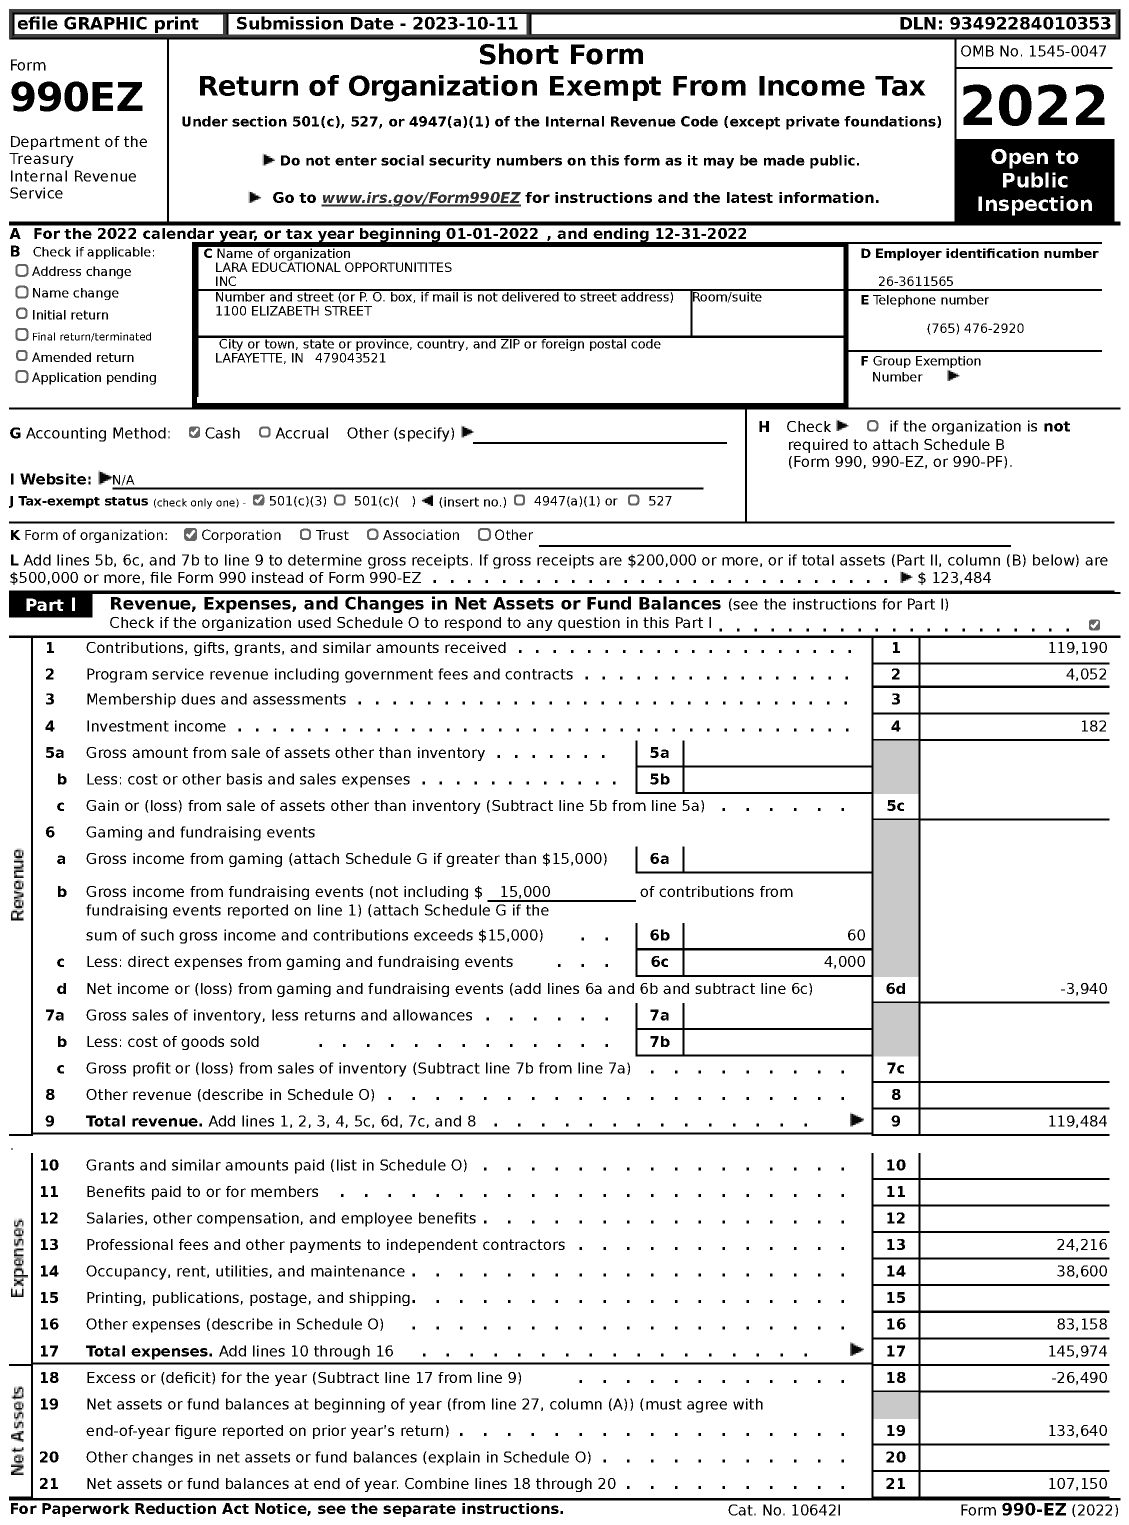 Image of first page of 2022 Form 990EZ for Lara Educational Opportunitites